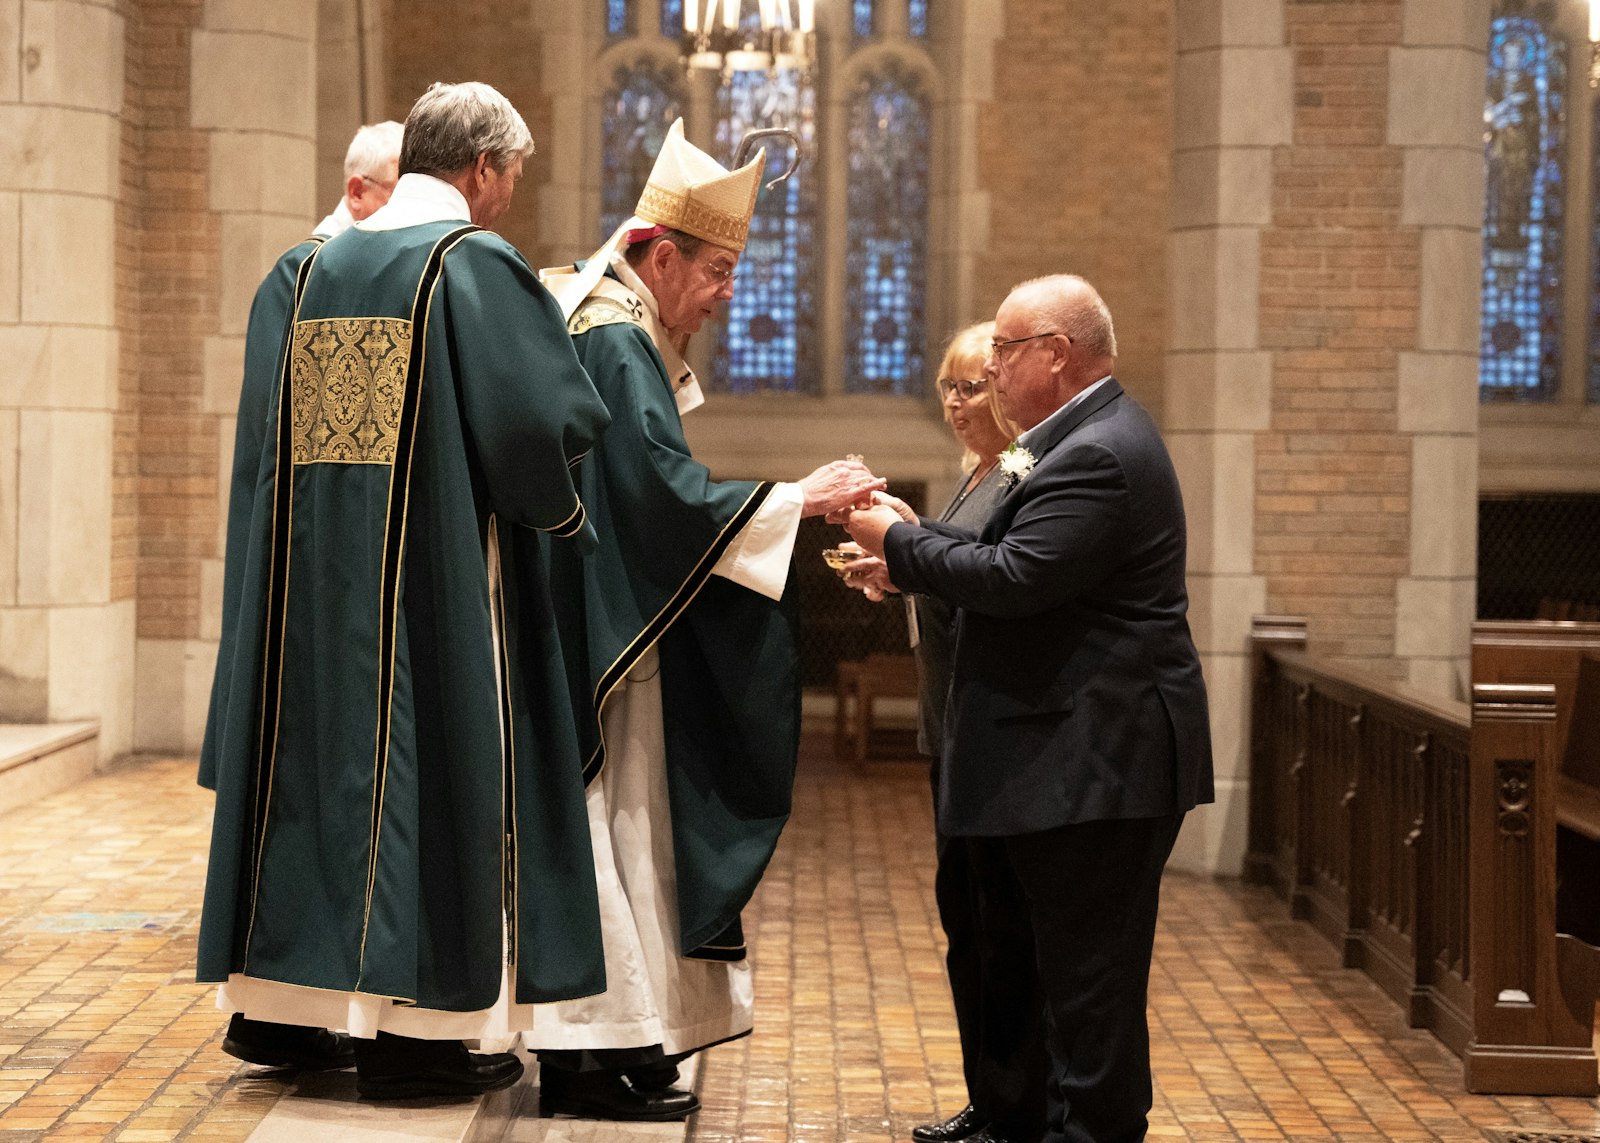 Archbishop Allen H. Vigneron accepts the gifts during a special Mass honoring deacon jubilarians and their wives Oct. 29 at Sacred Heart Major Seminary.